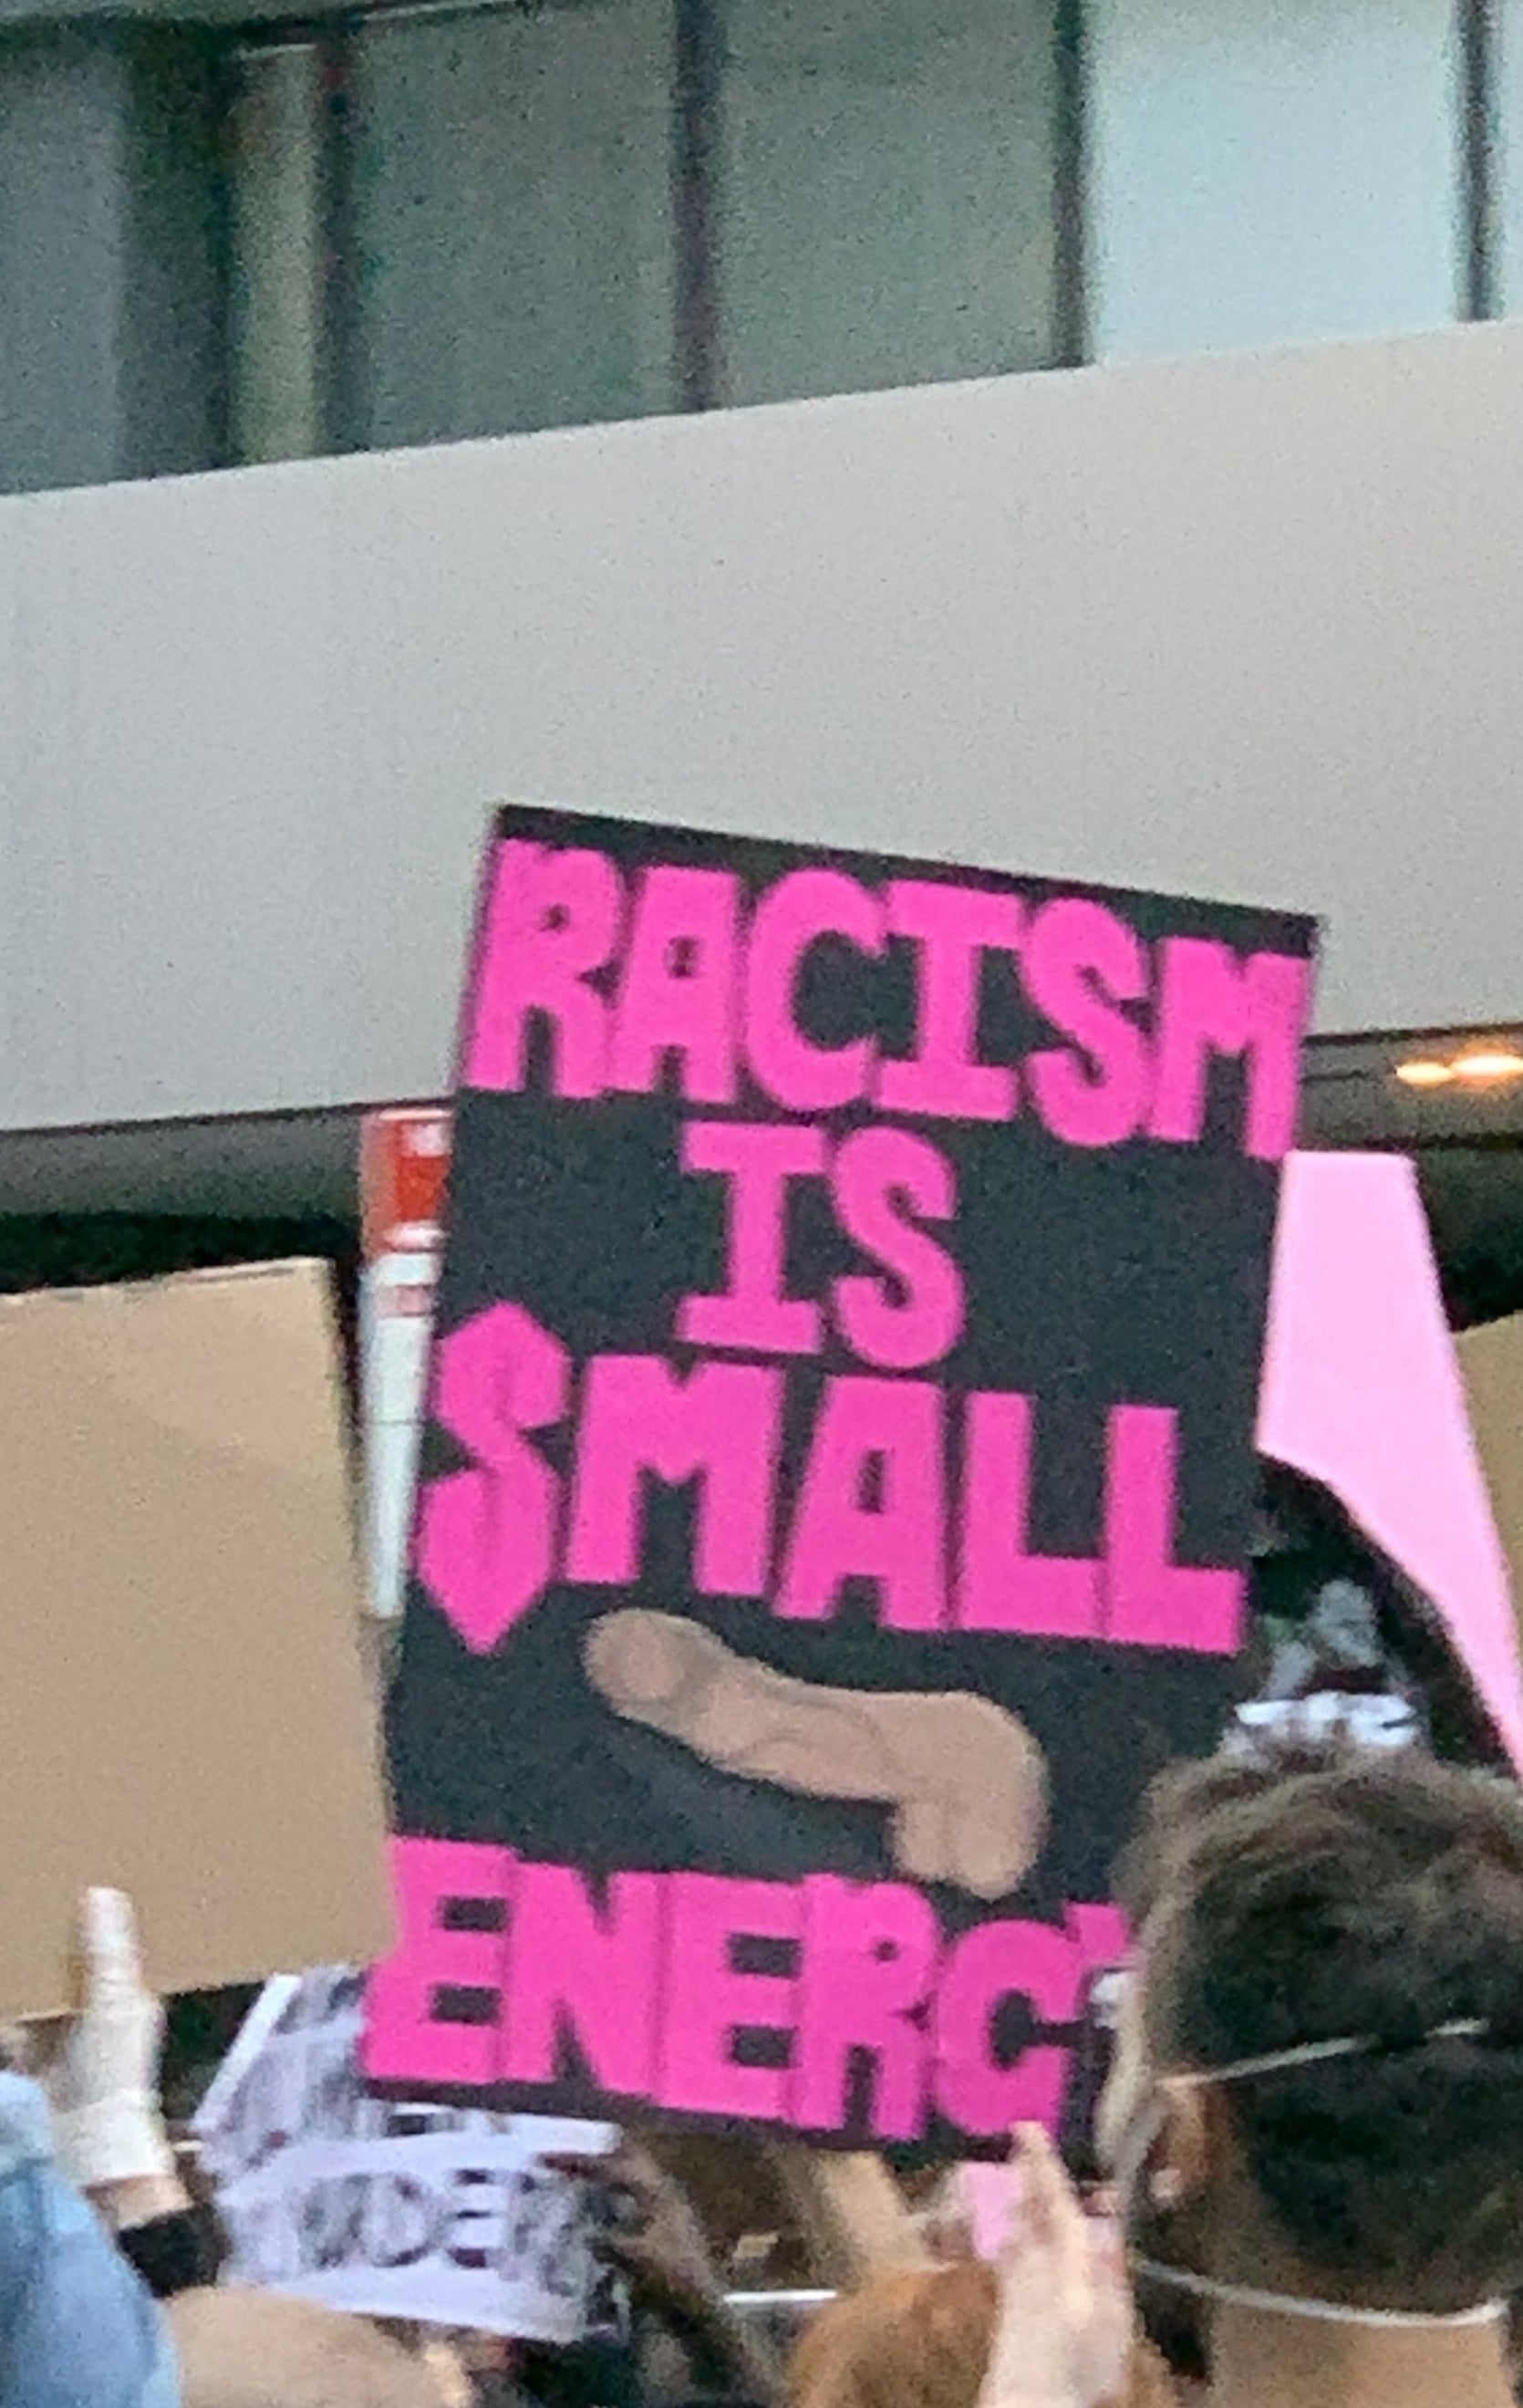 A protest sign reads &quot;Racism is small dick energy&quot;.